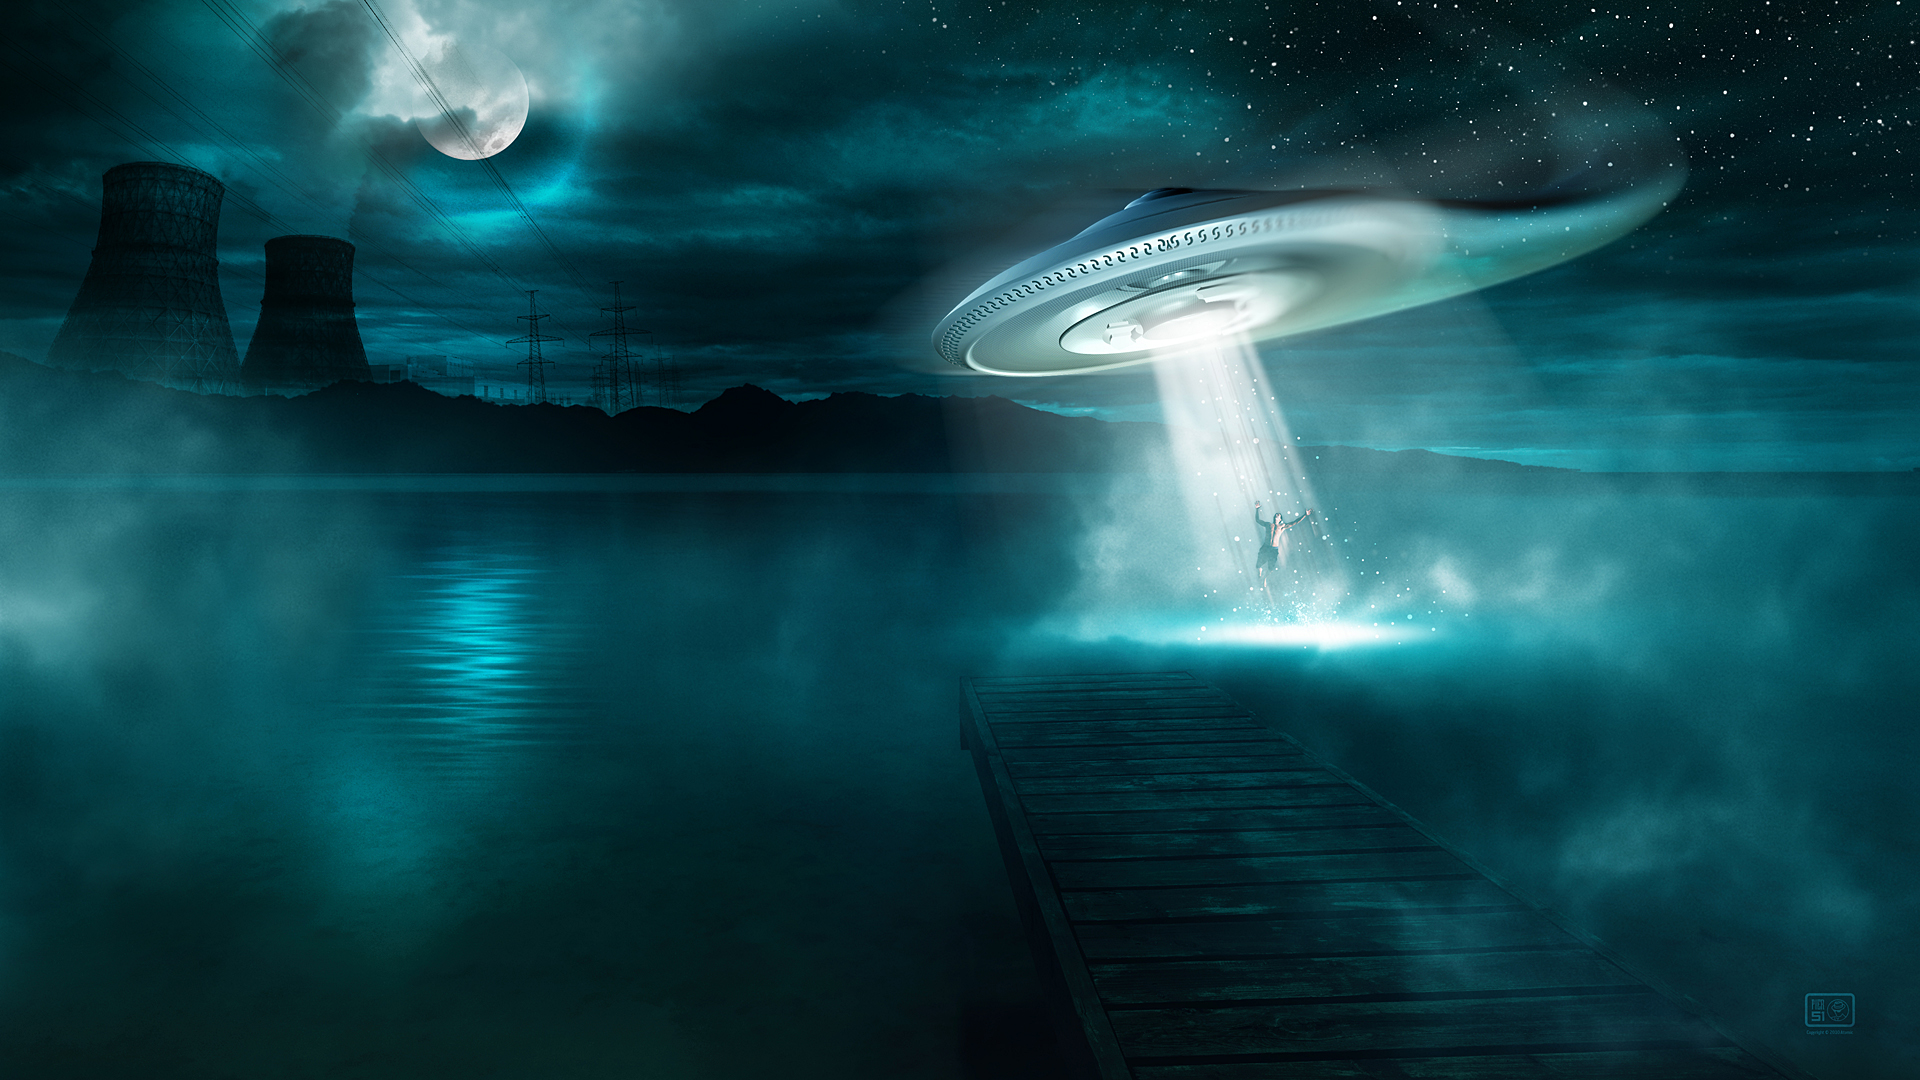 SpaceFantasy Wallpaper Set 45 Awesome Wallpapers 1920x1080